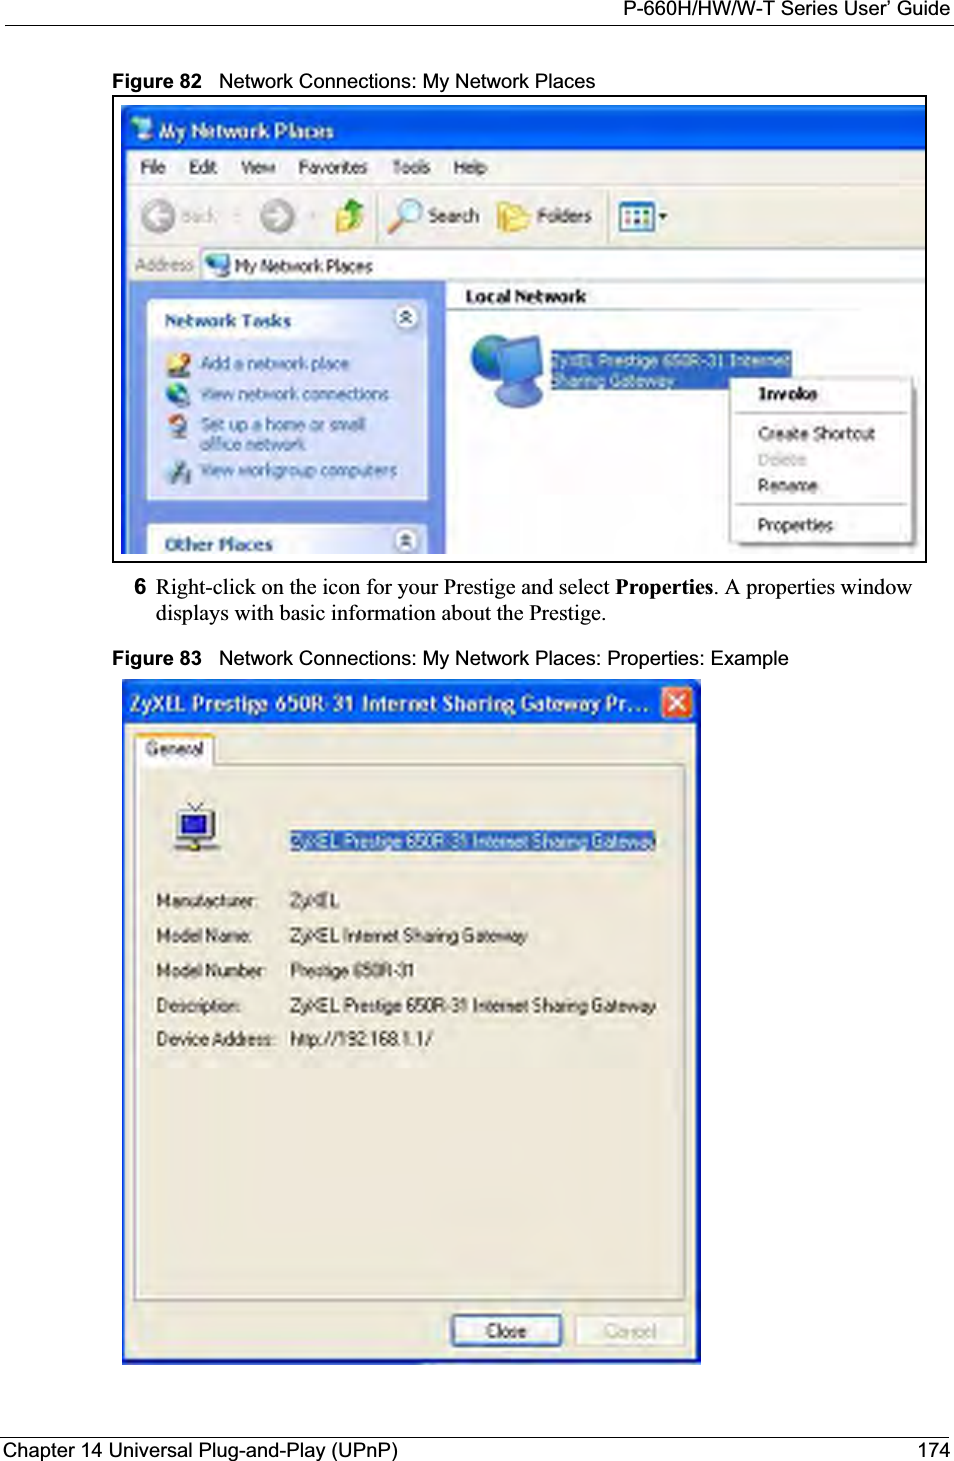 P-660H/HW/W-T Series User’ GuideChapter 14 Universal Plug-and-Play (UPnP) 174Figure 82   Network Connections: My Network Places6Right-click on the icon for your Prestige and select Properties. A properties window displays with basic information about the Prestige. Figure 83   Network Connections: My Network Places: Properties: Example